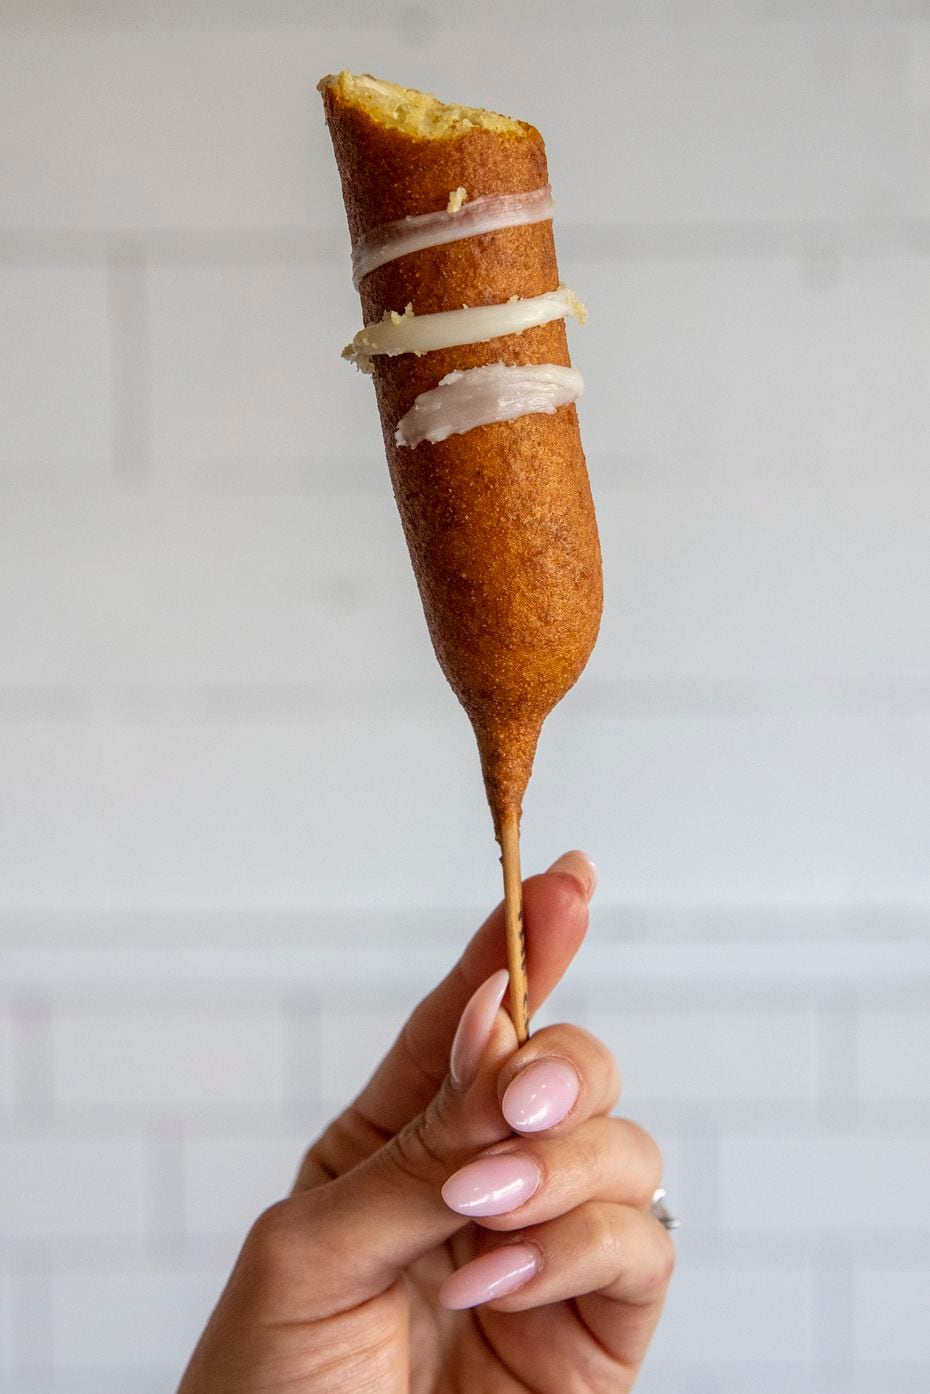 One of CornDog With No Name's meat-free 'dogs is the cheese: mozzarella cheese, dipped in corn dog batter and fried in peanut oil.